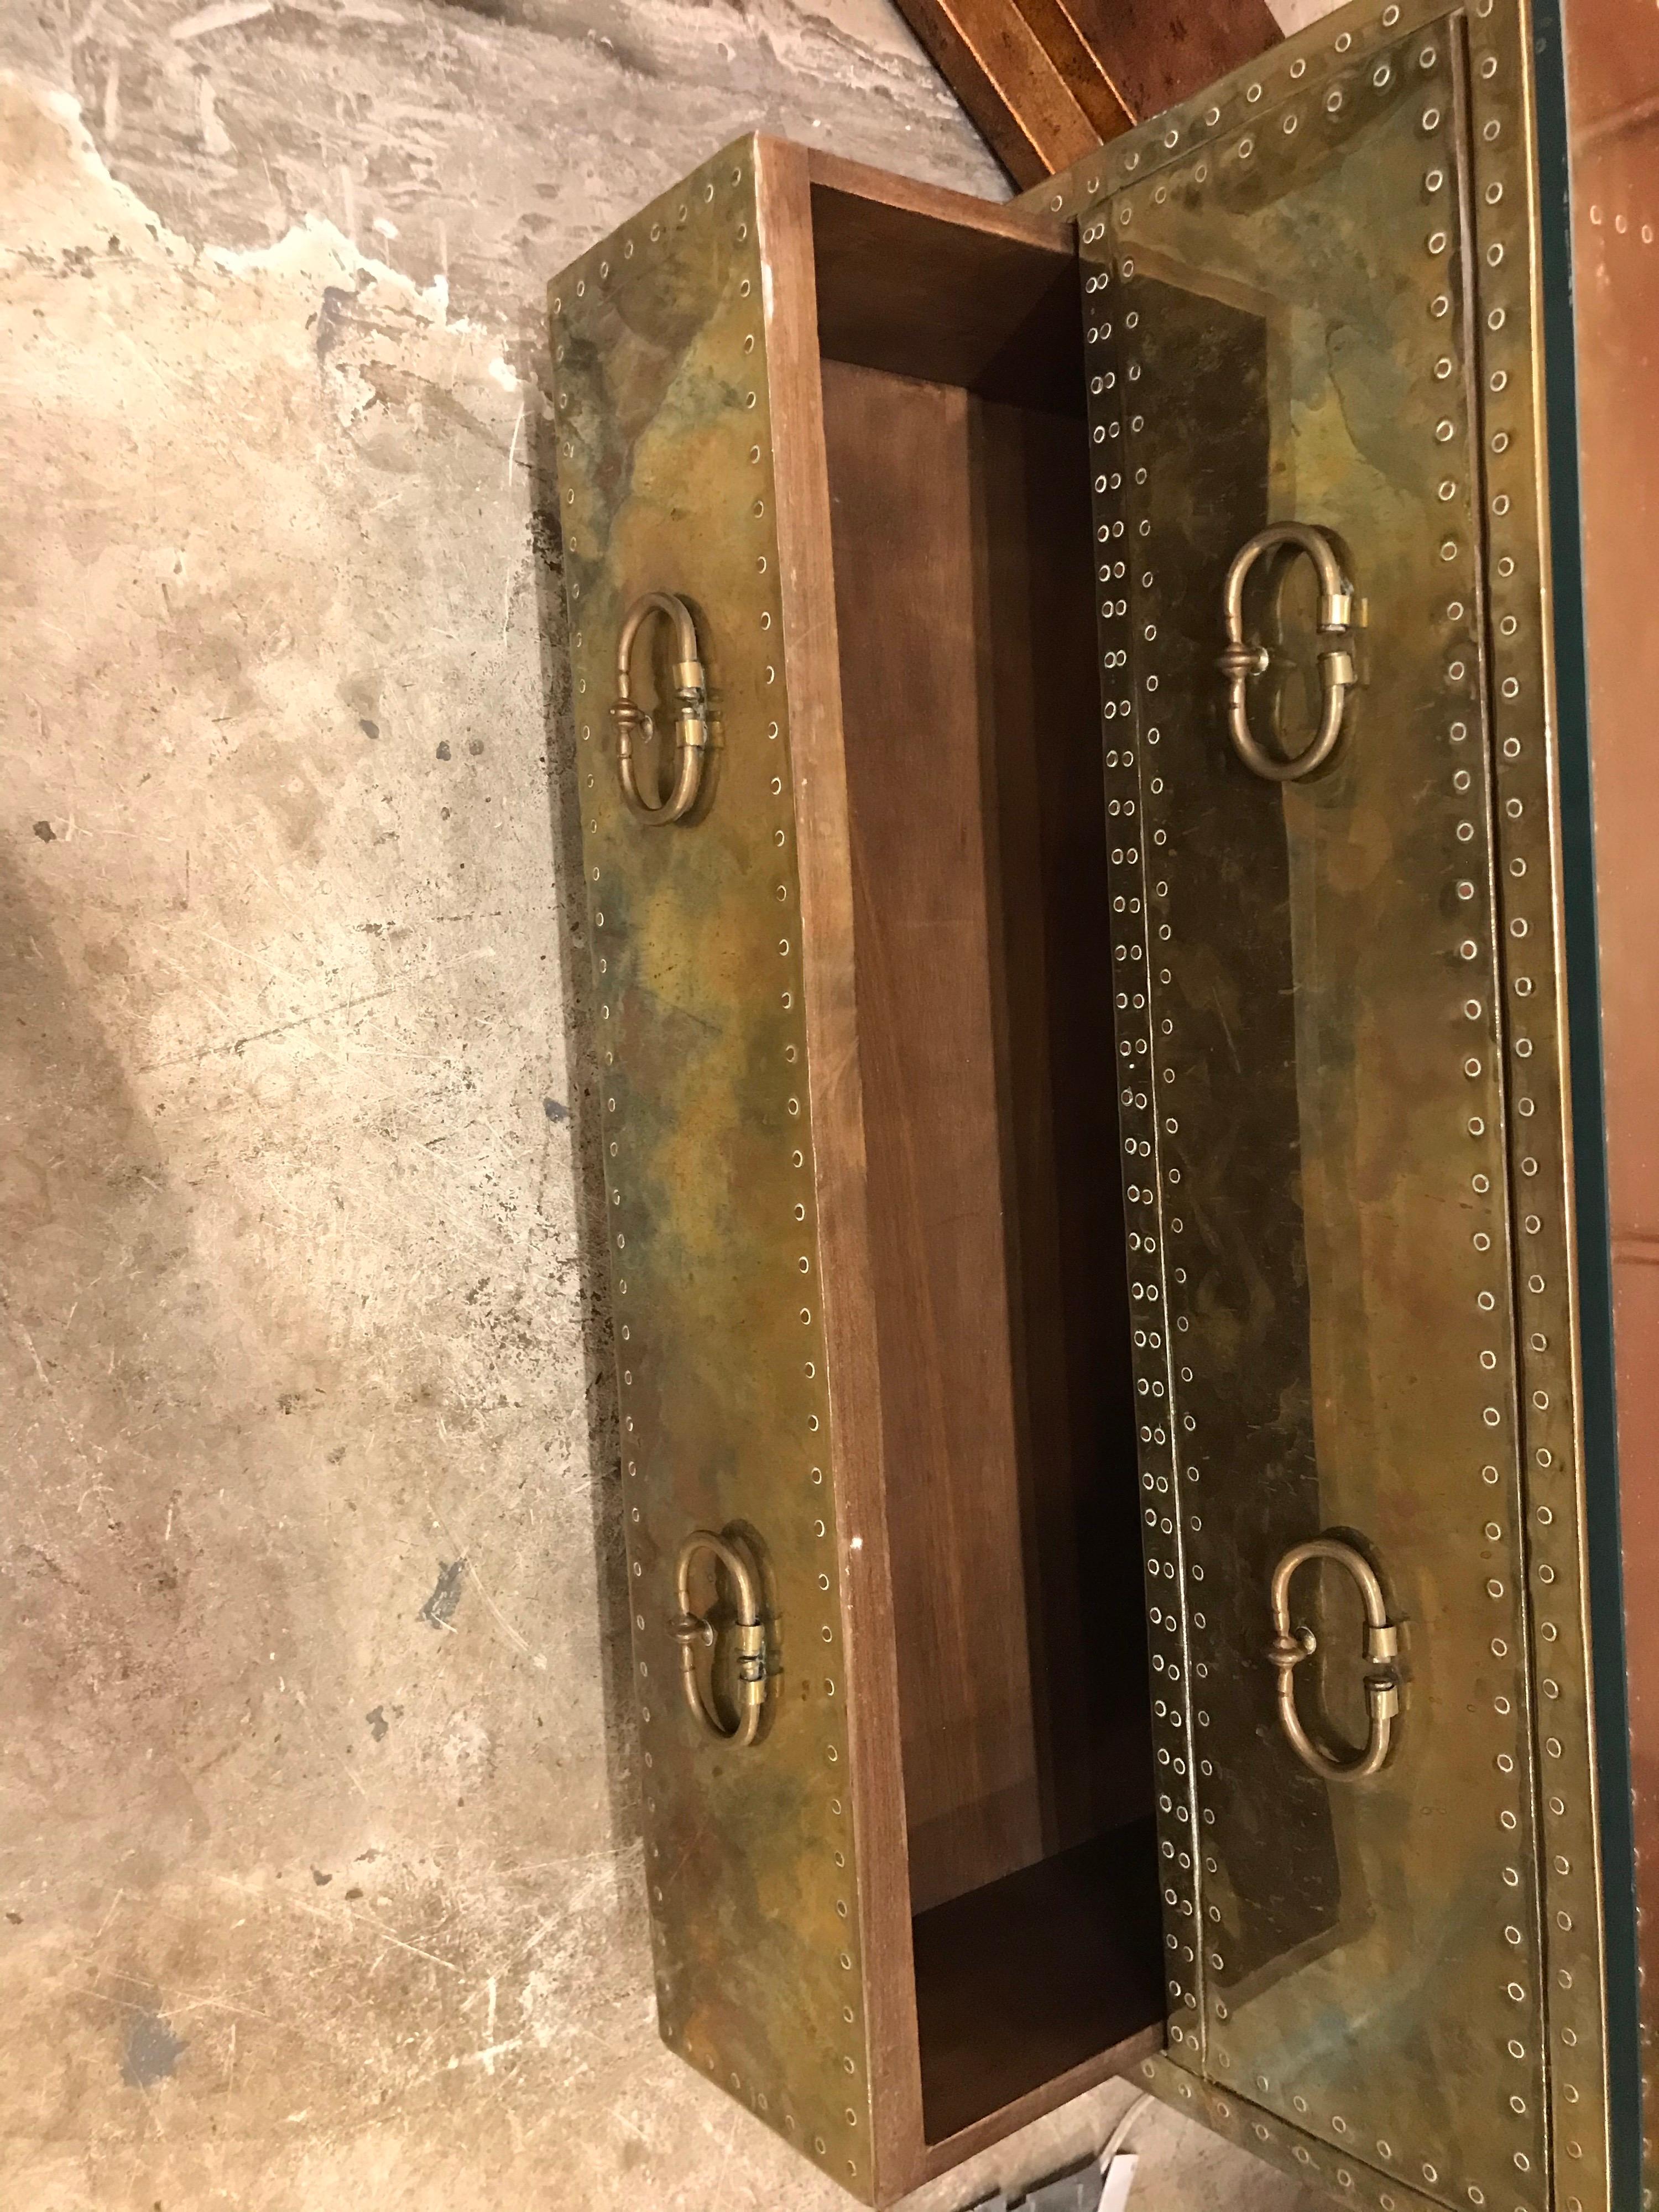 This is a brass clad two-drawer chest or trunk with copper nail heads and bun feet. It is made by Sarreid probably in the 1970s-1980s and has a glass top to protect it.